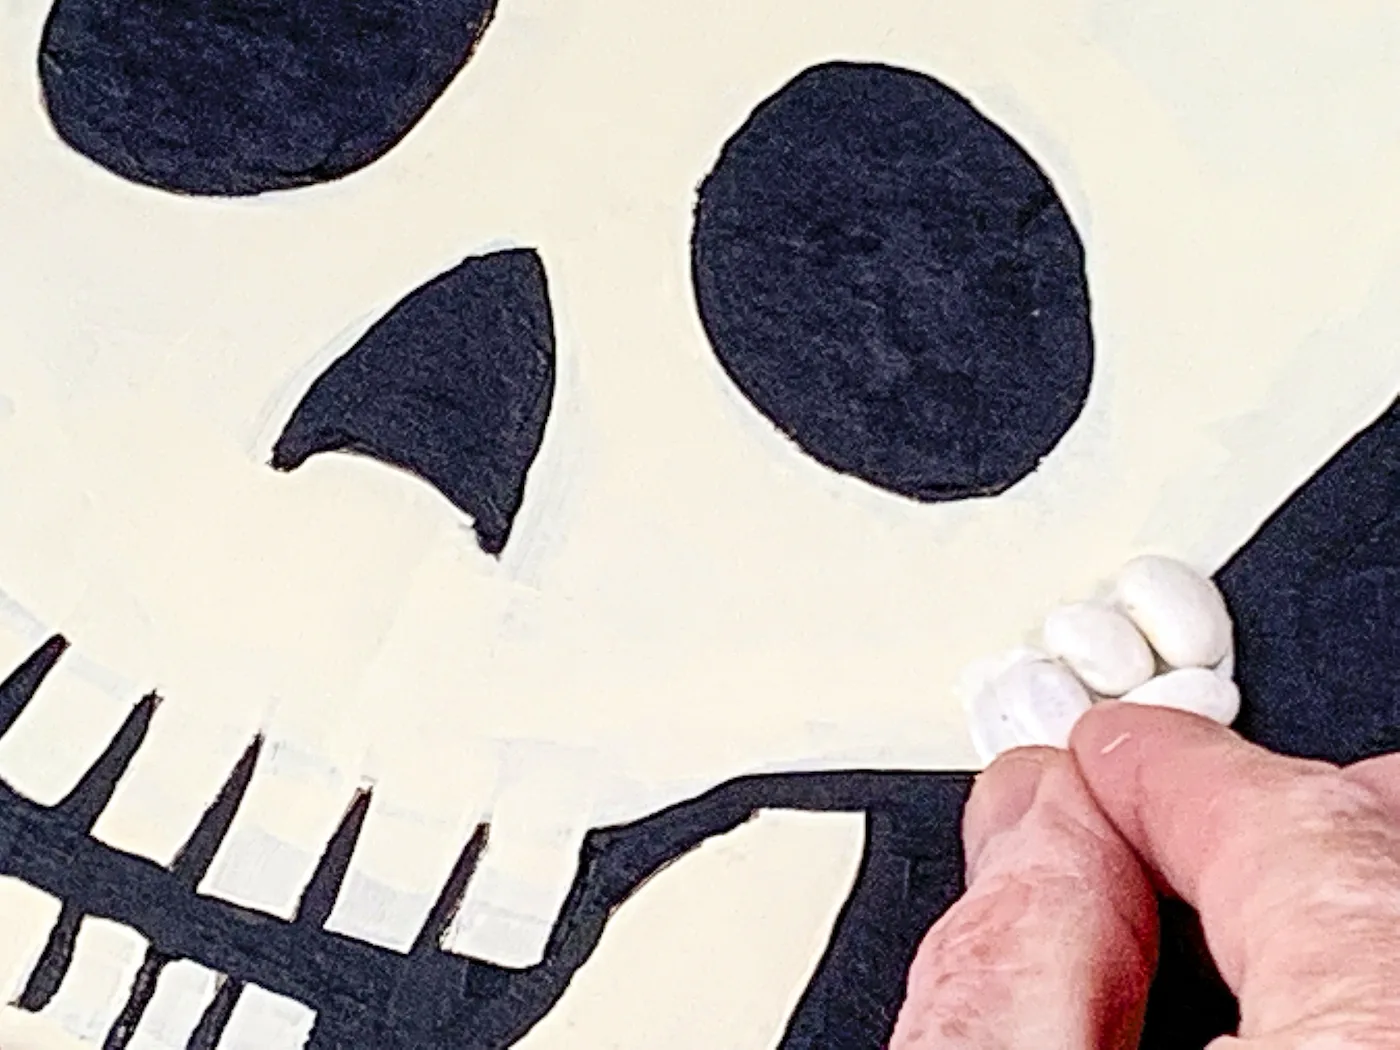 Adding beans to the skull with glue